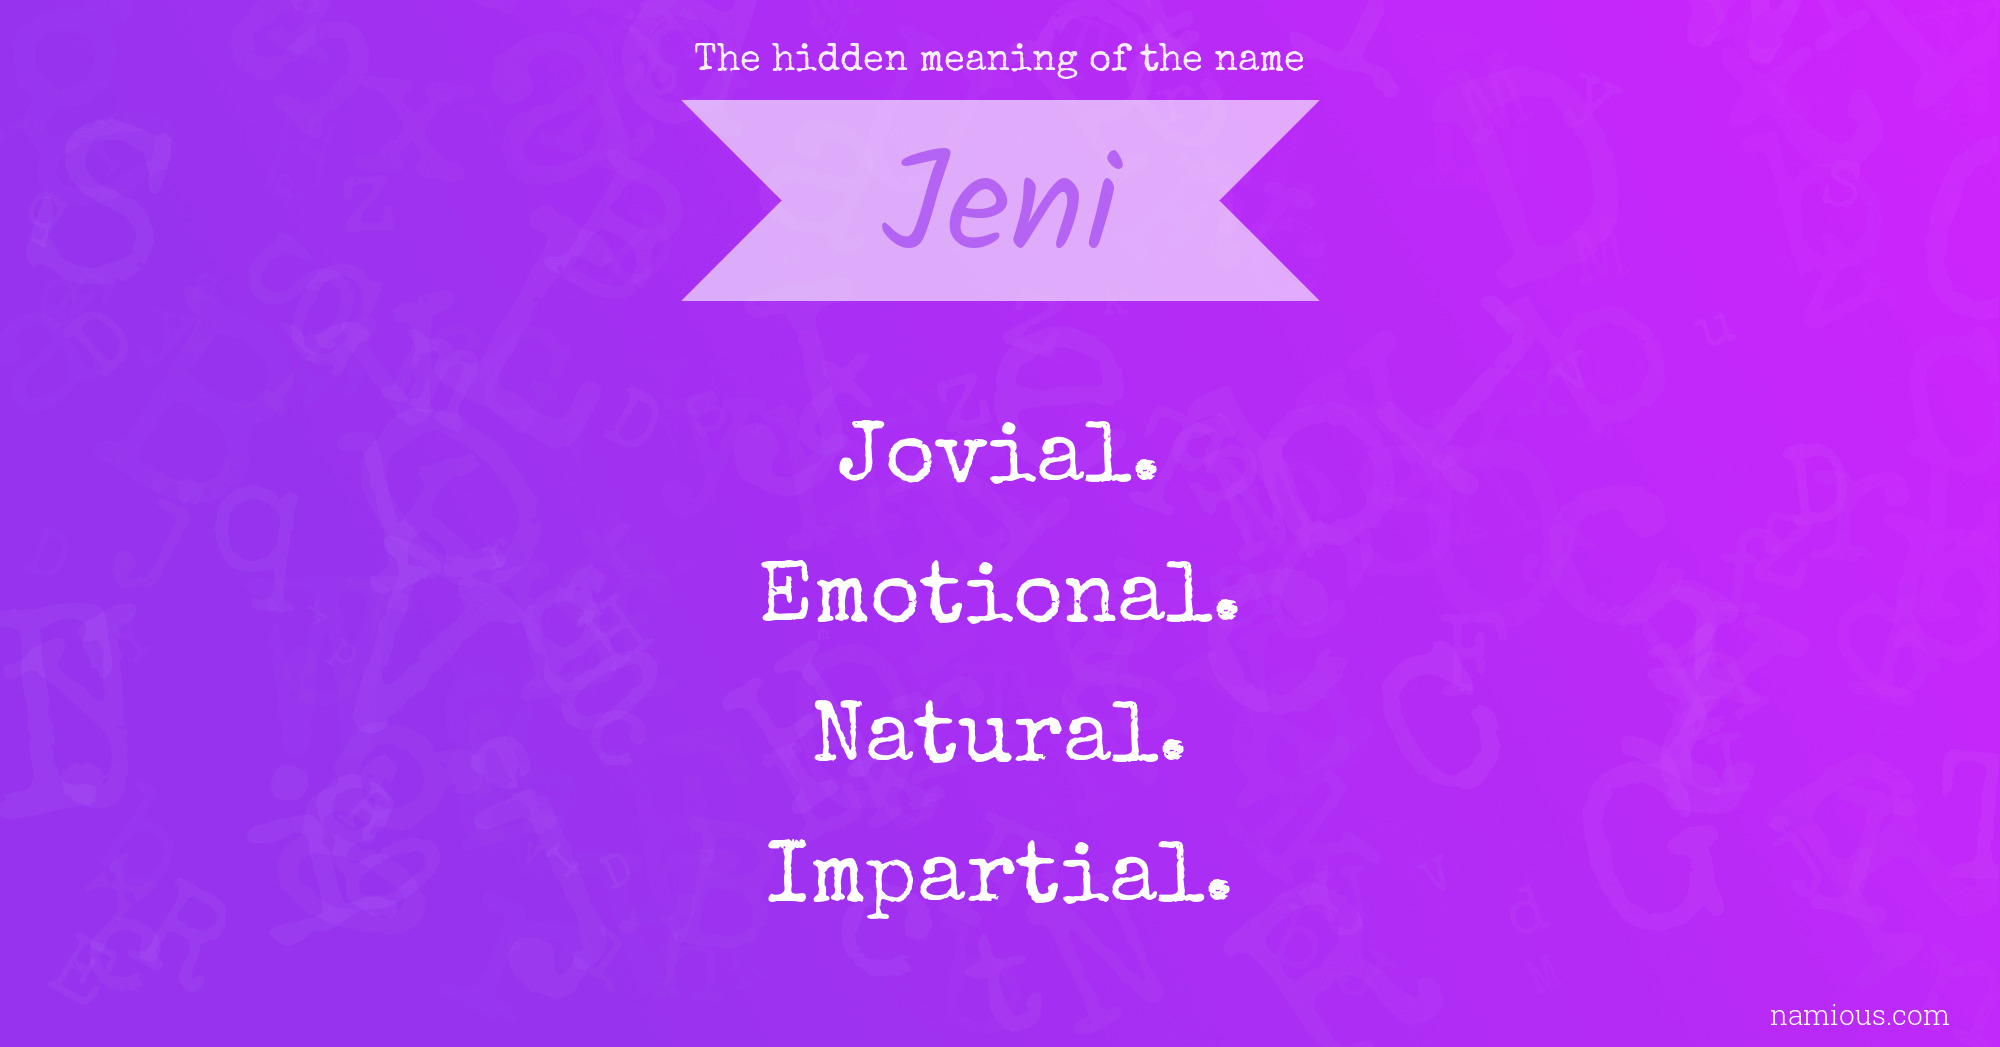 The hidden meaning of the name Jeni